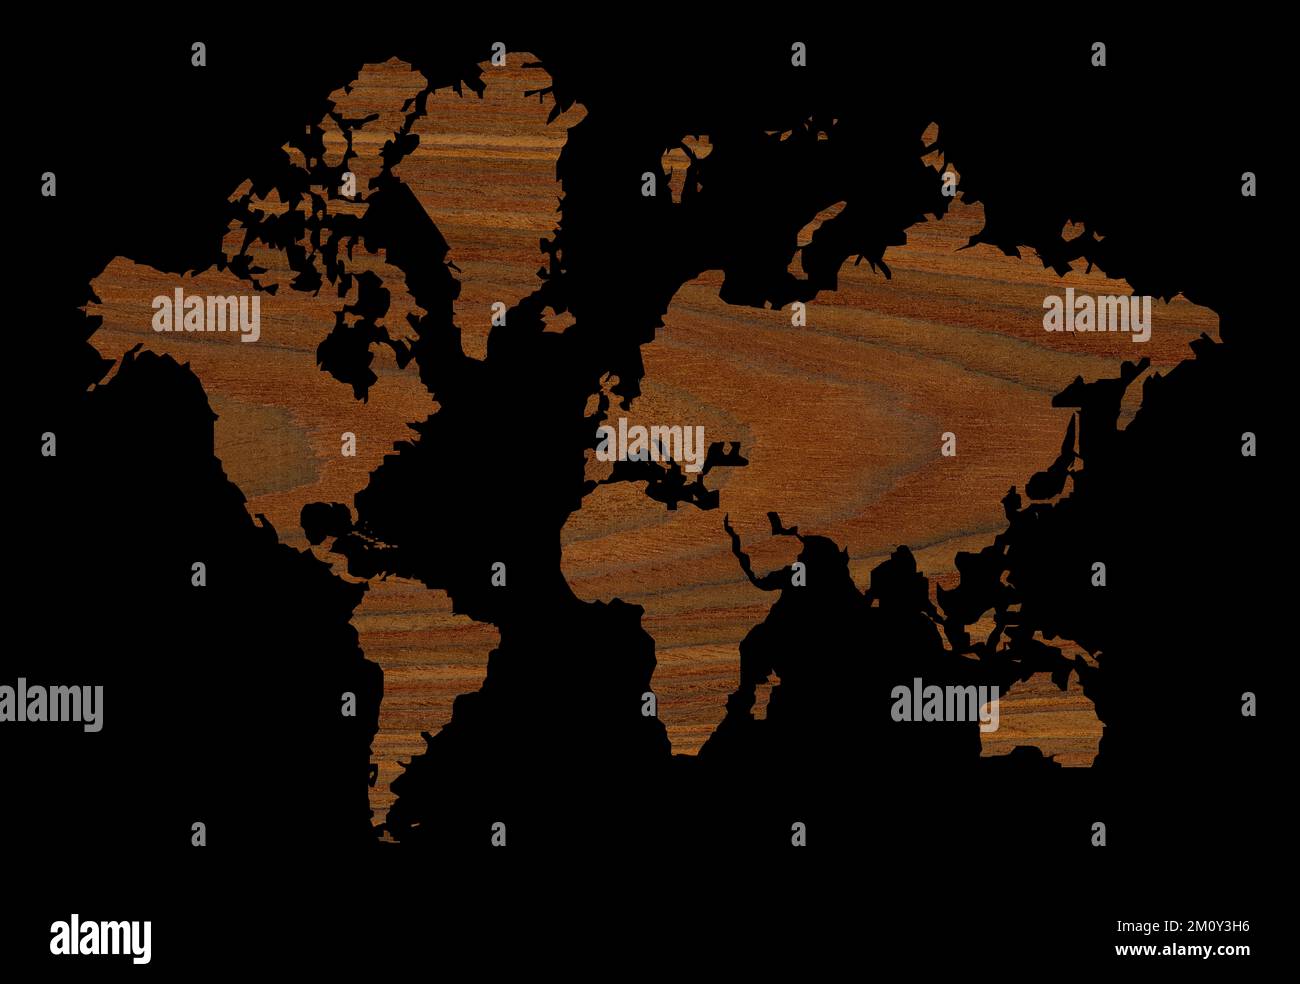 Detailed decorative world map cut from wood texture rosewood, transparent world map showing continents, isolated on black background Stock Photo